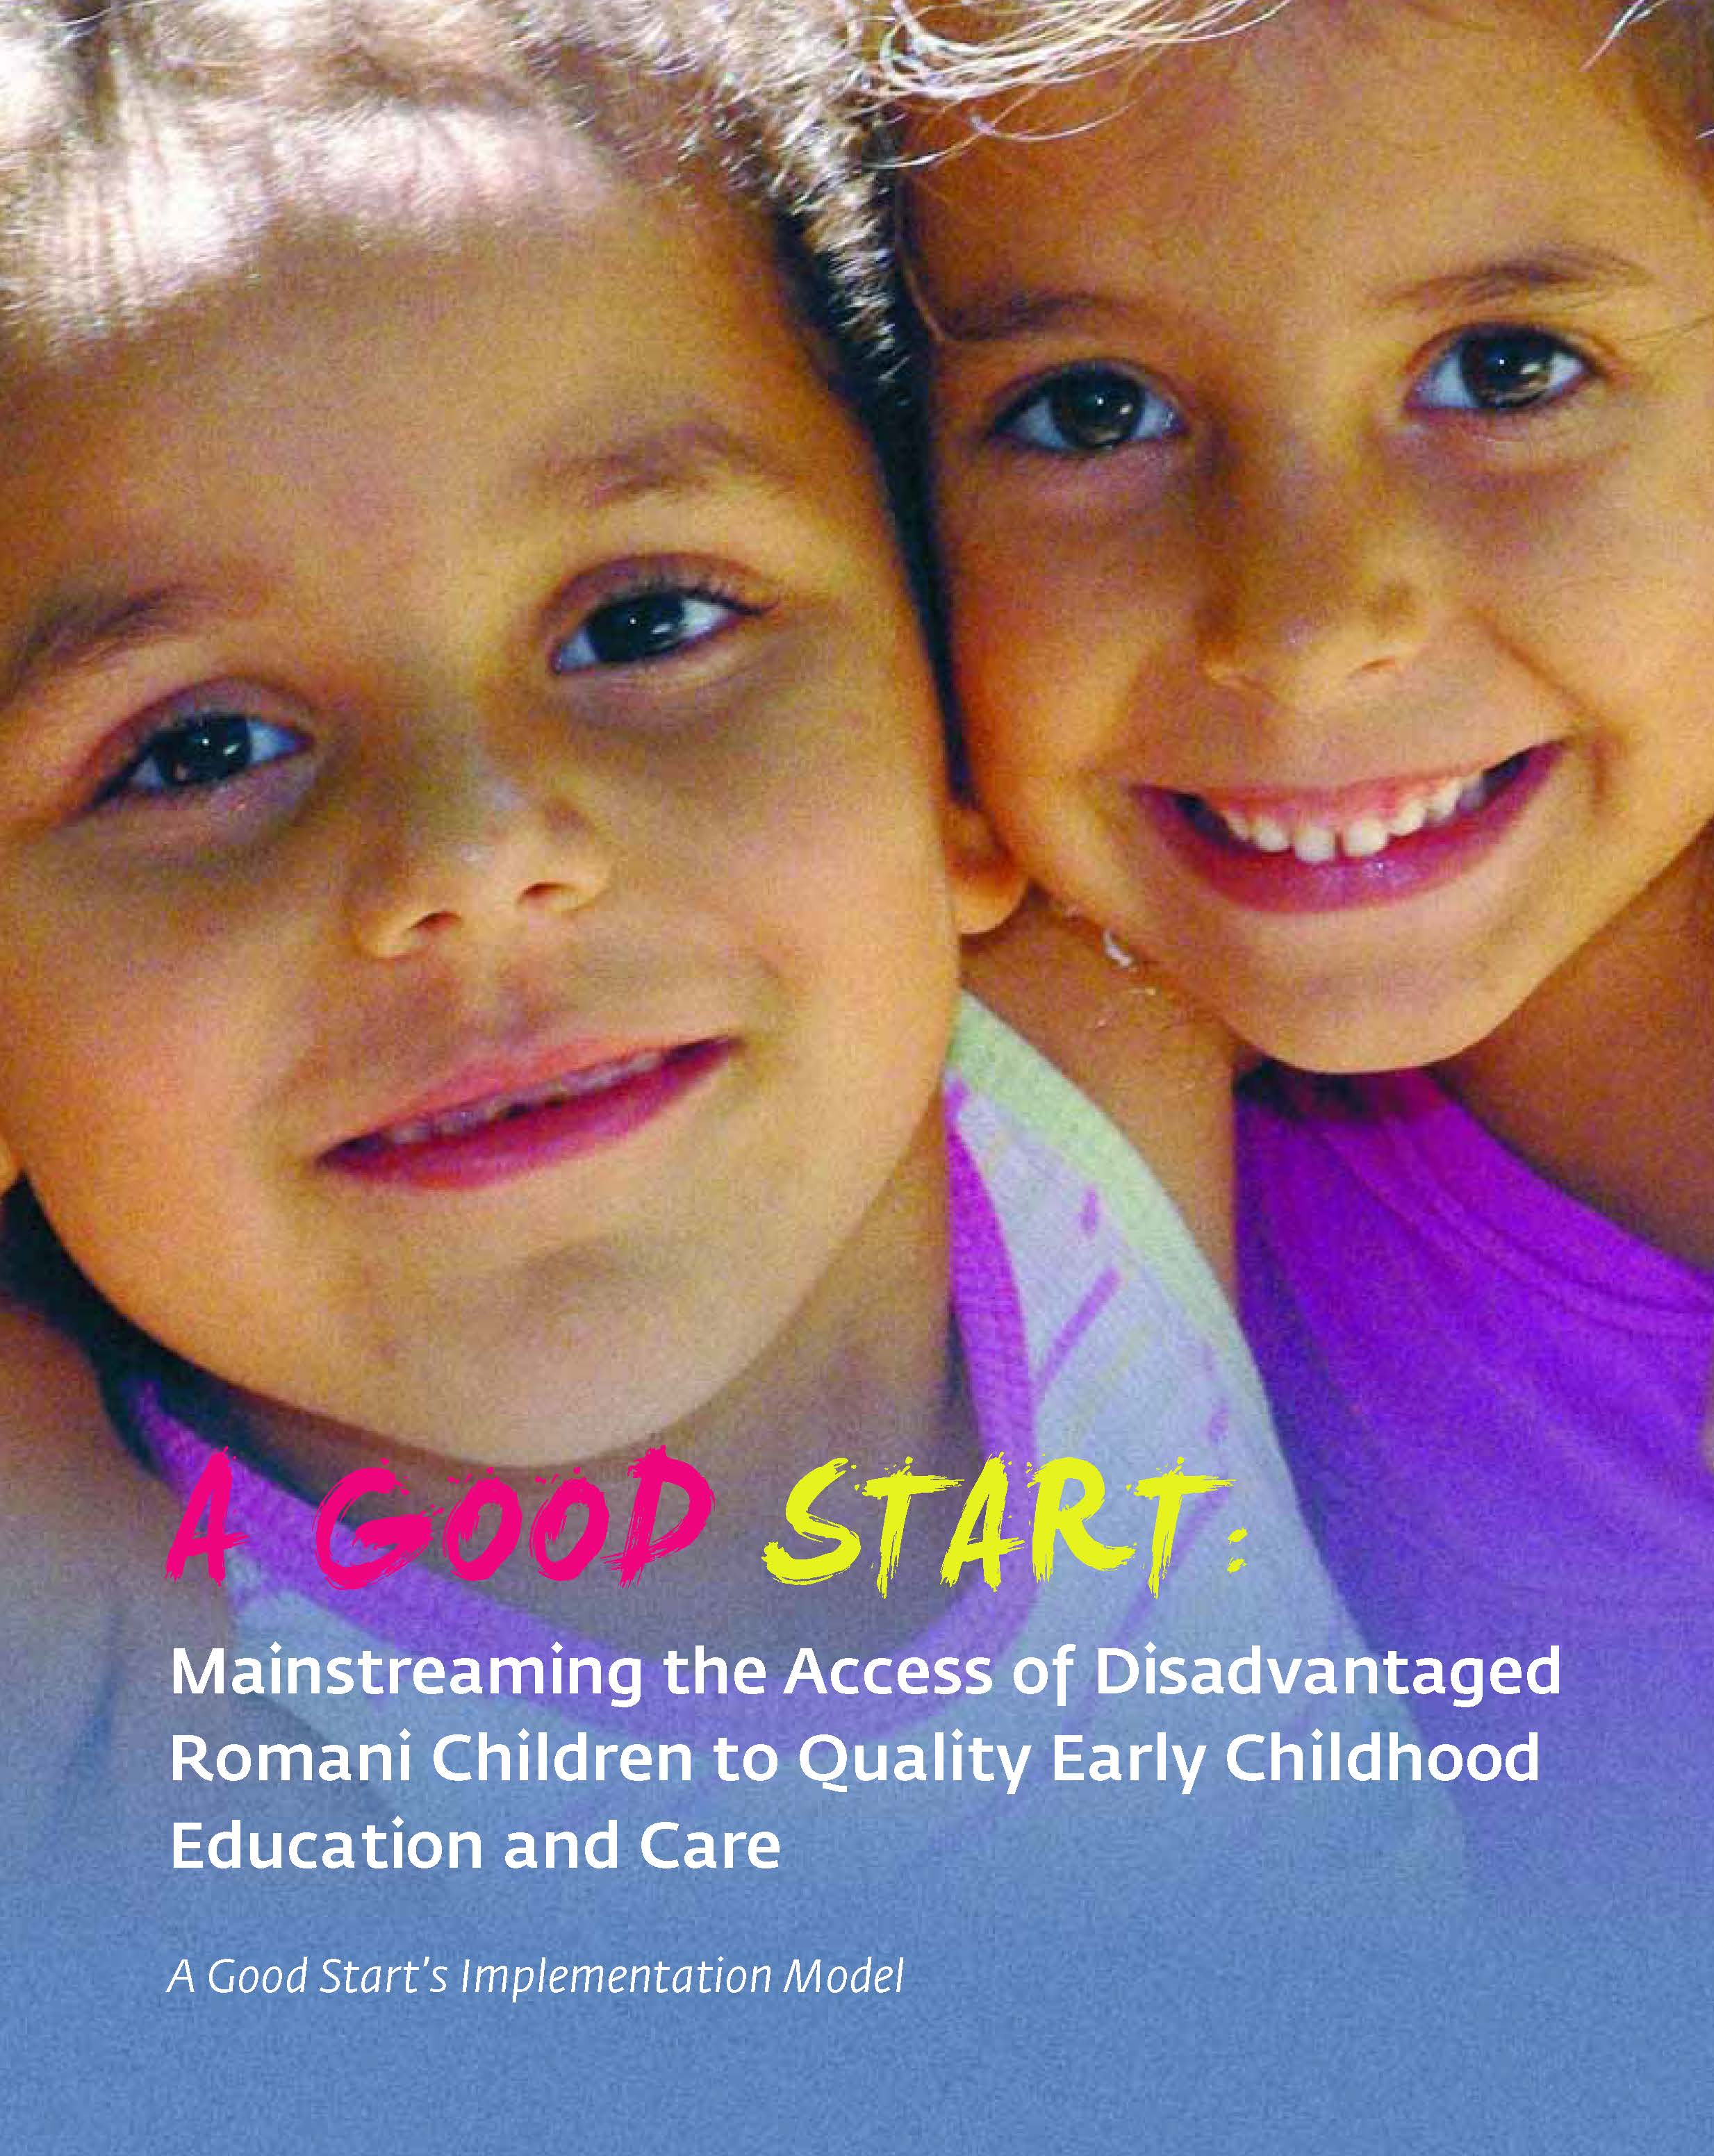 A Good Start Mainstreaming the Access of Disadvantaged Romani Children to Quality Early Childhood Education and Care